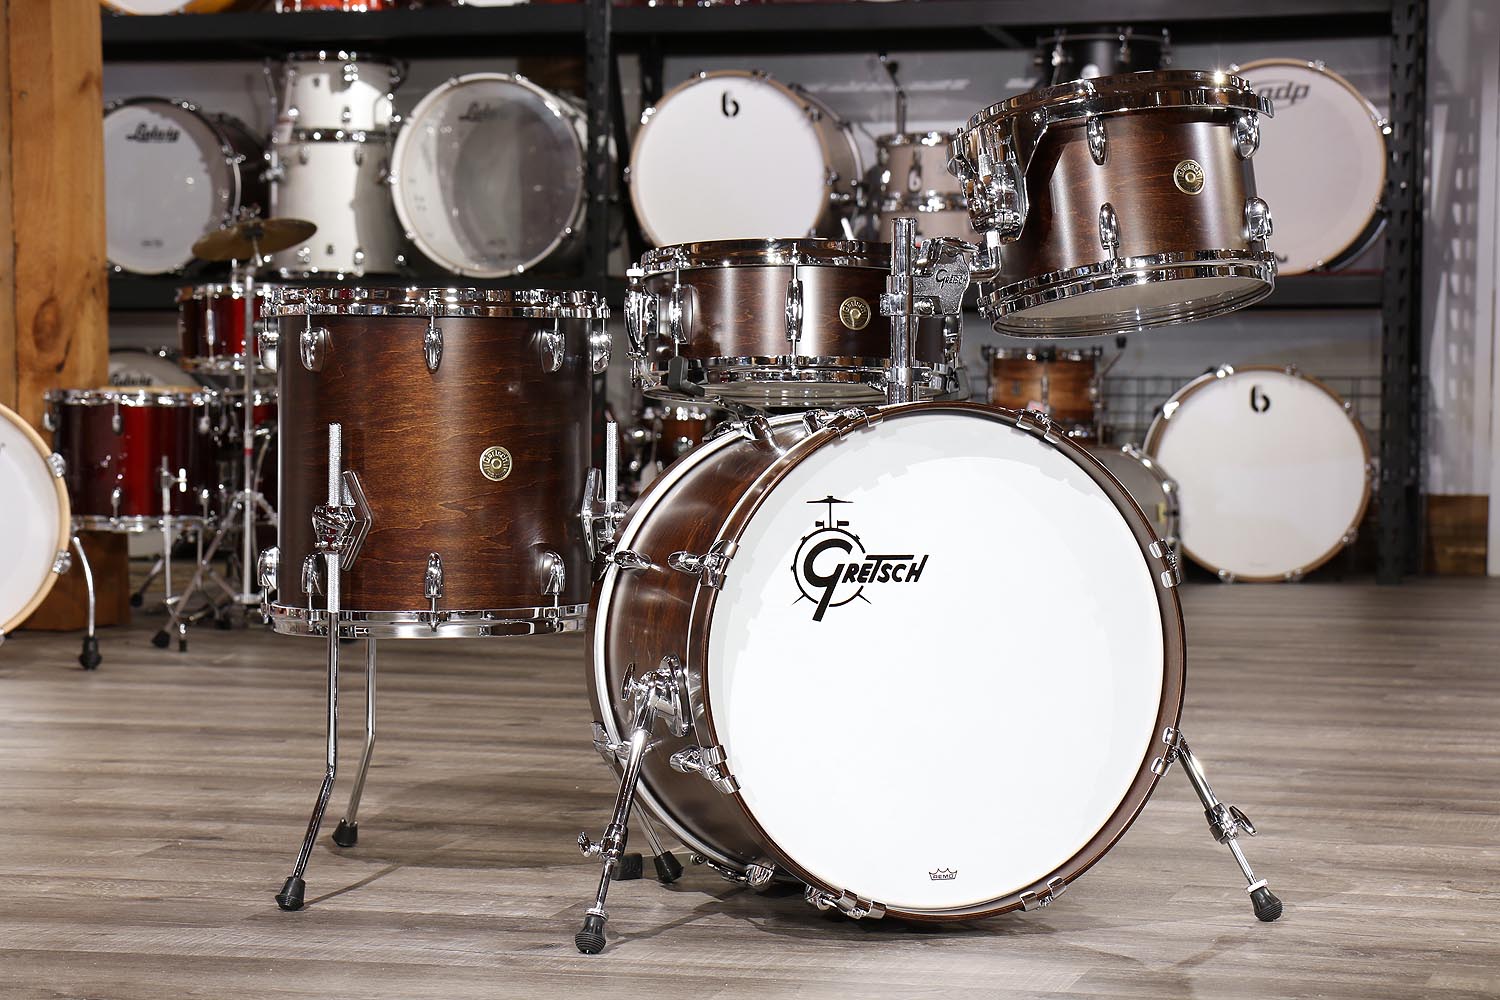 The Great Gretsch Drums Shootout